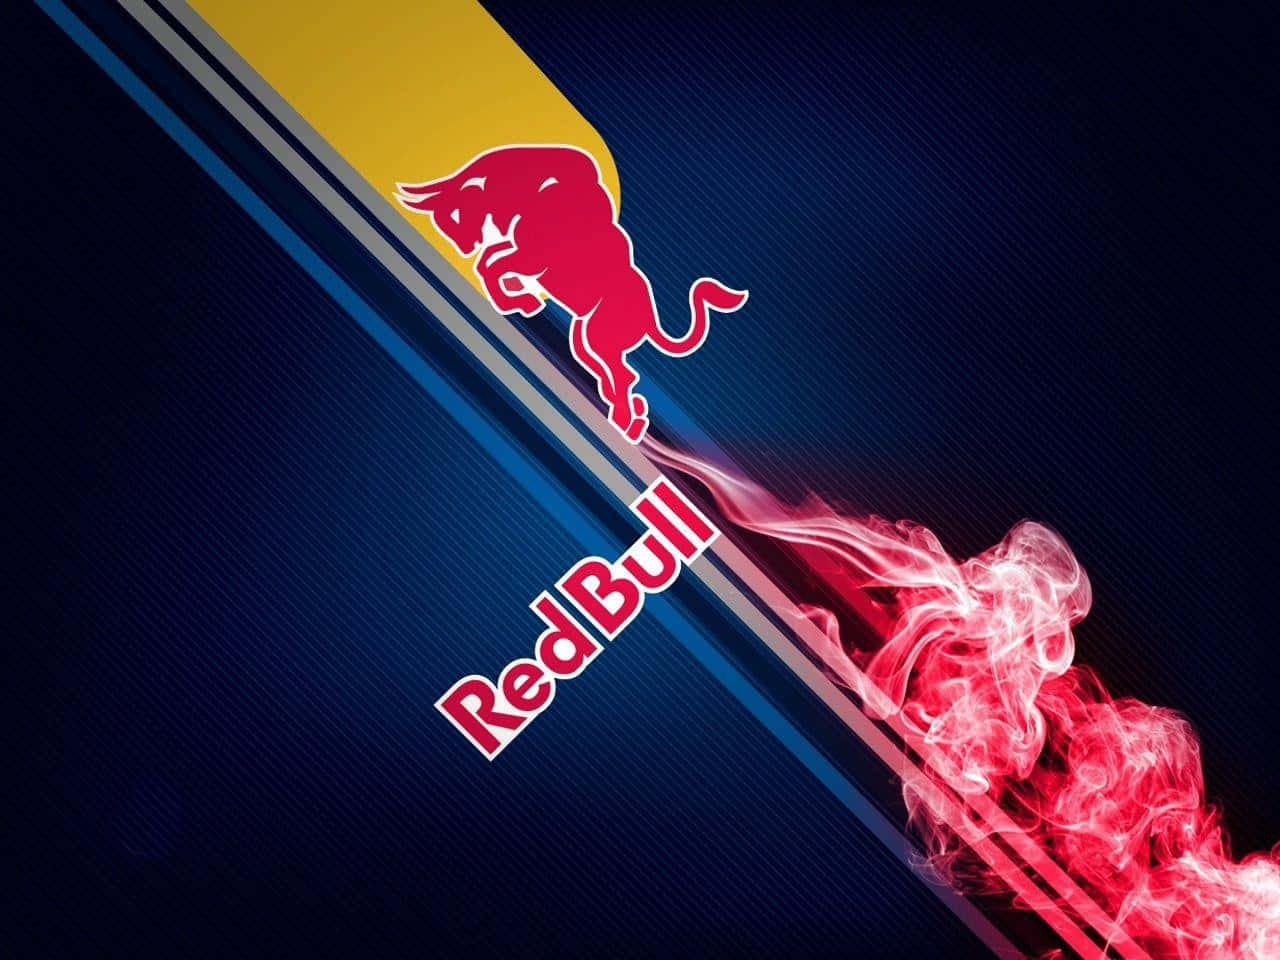 Get an Energy Boost with Red Bull